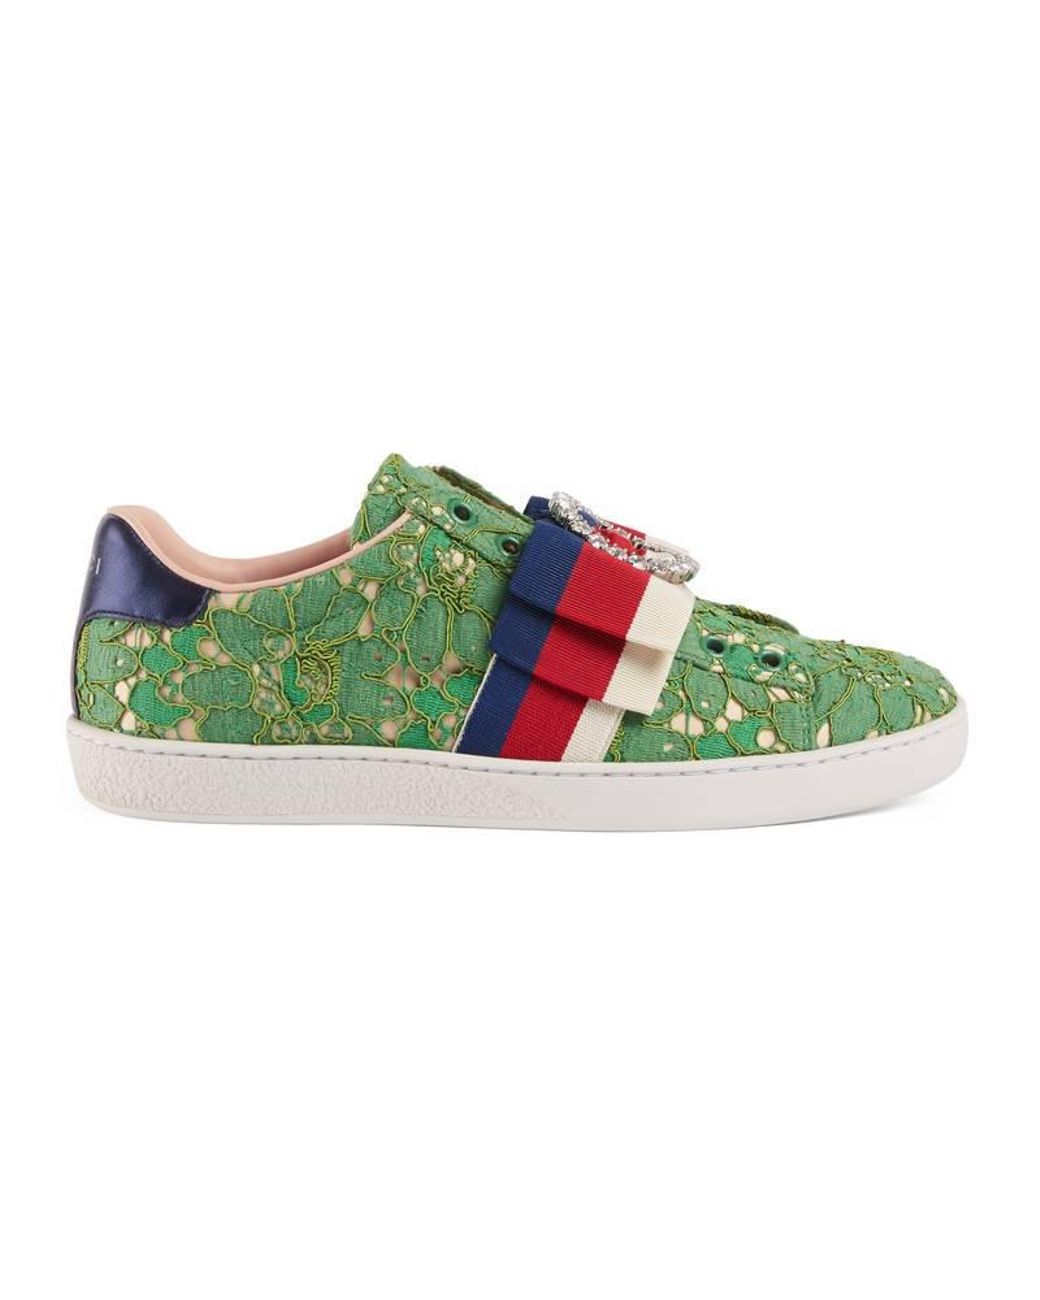 Gucci Ace Lace Sneakers in Green | Lyst